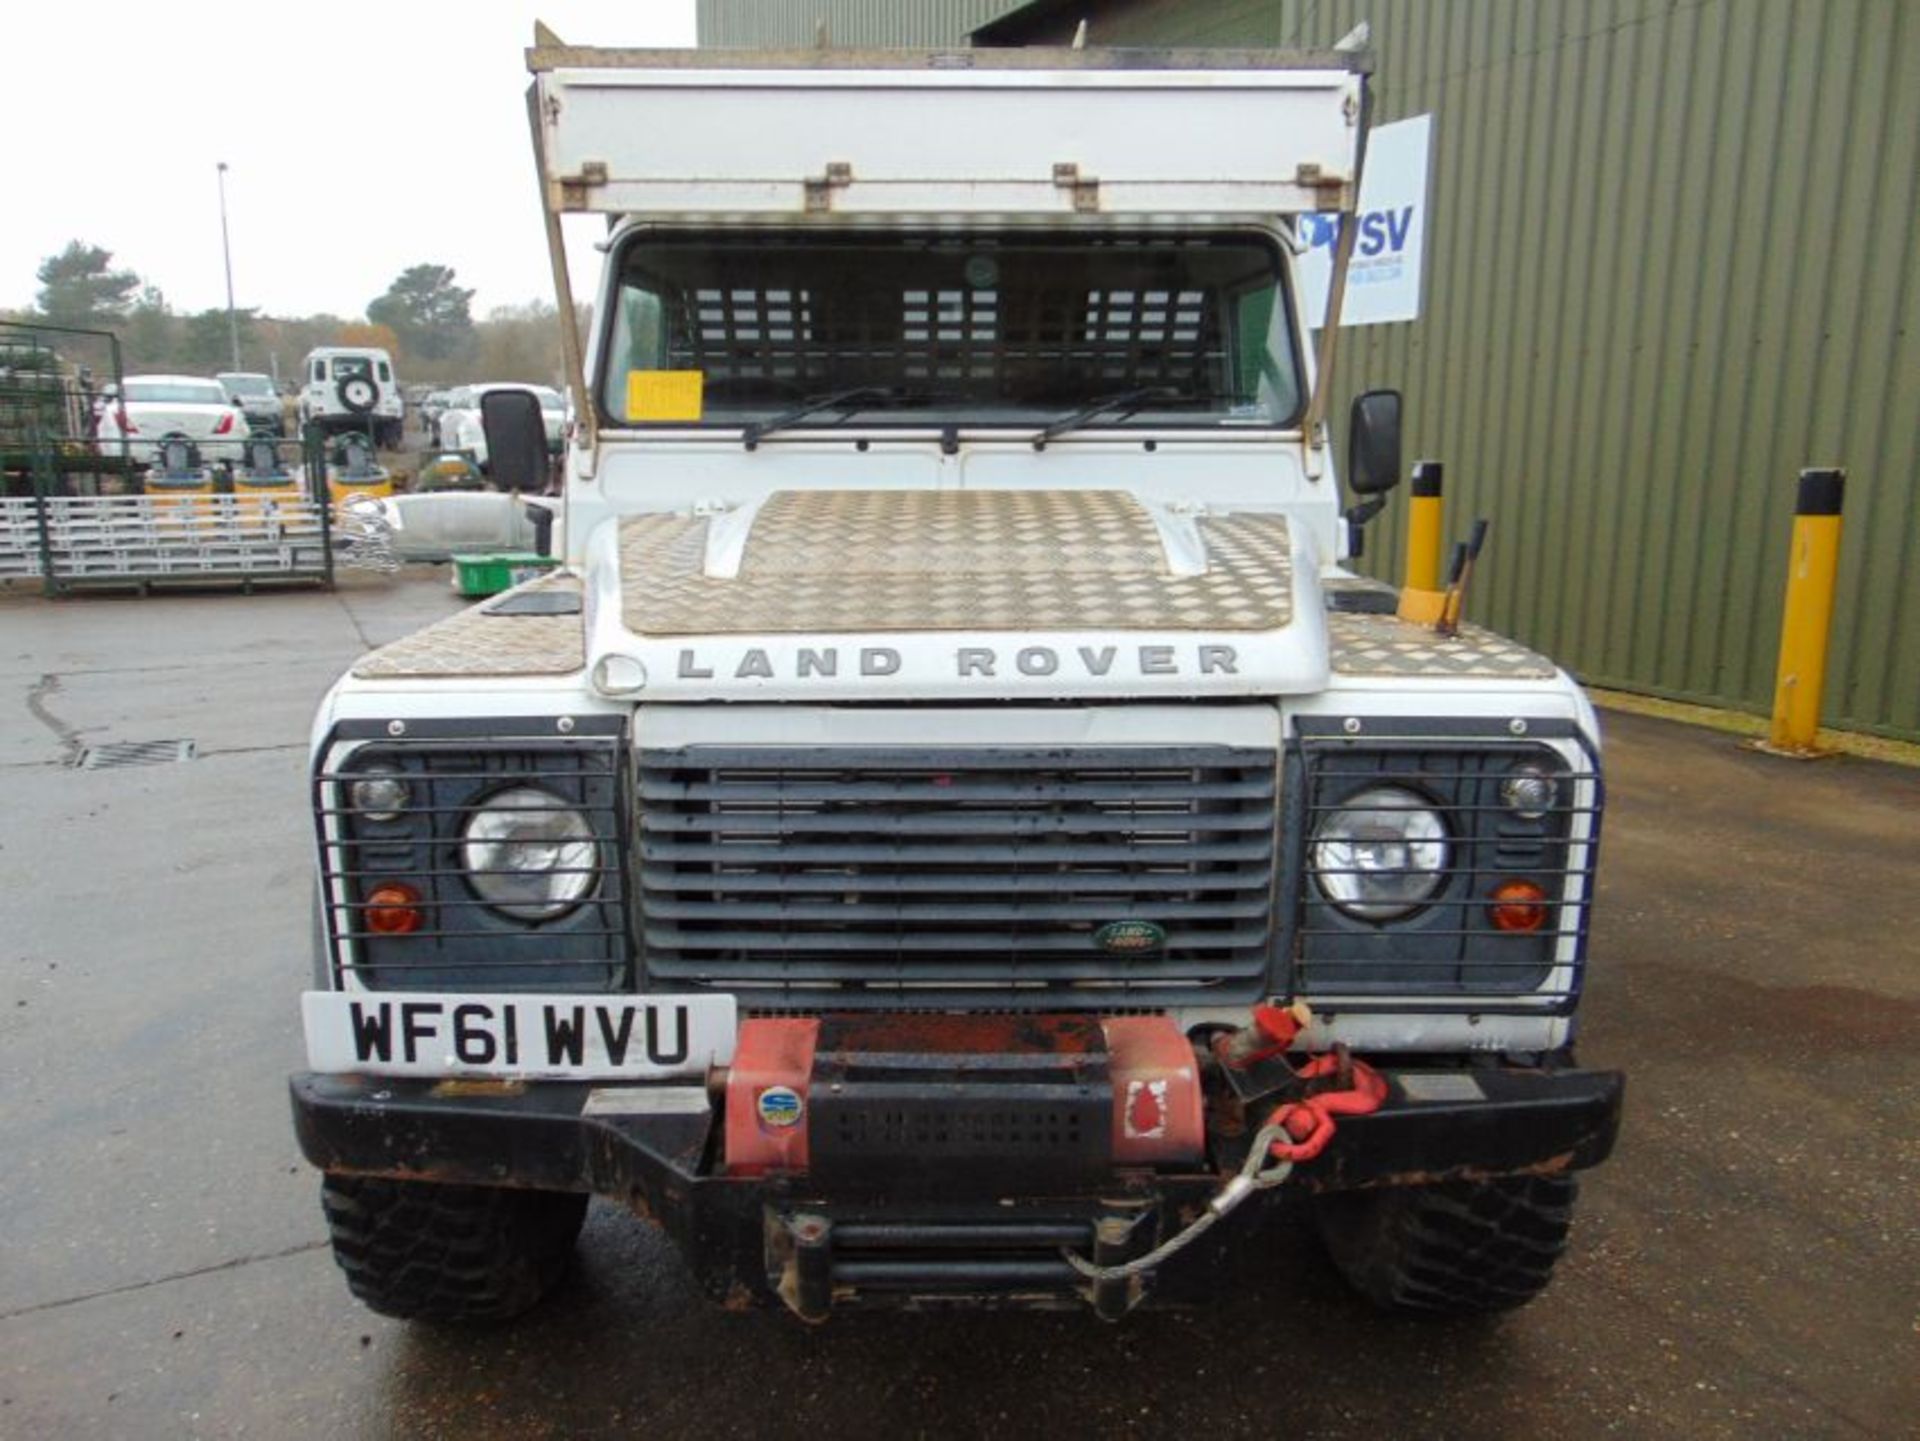 2011 Land Rover Defender 110 Puma hardtop 4x4 mobile workshop with Winch Etc. From UK Utility Co. - Image 2 of 31